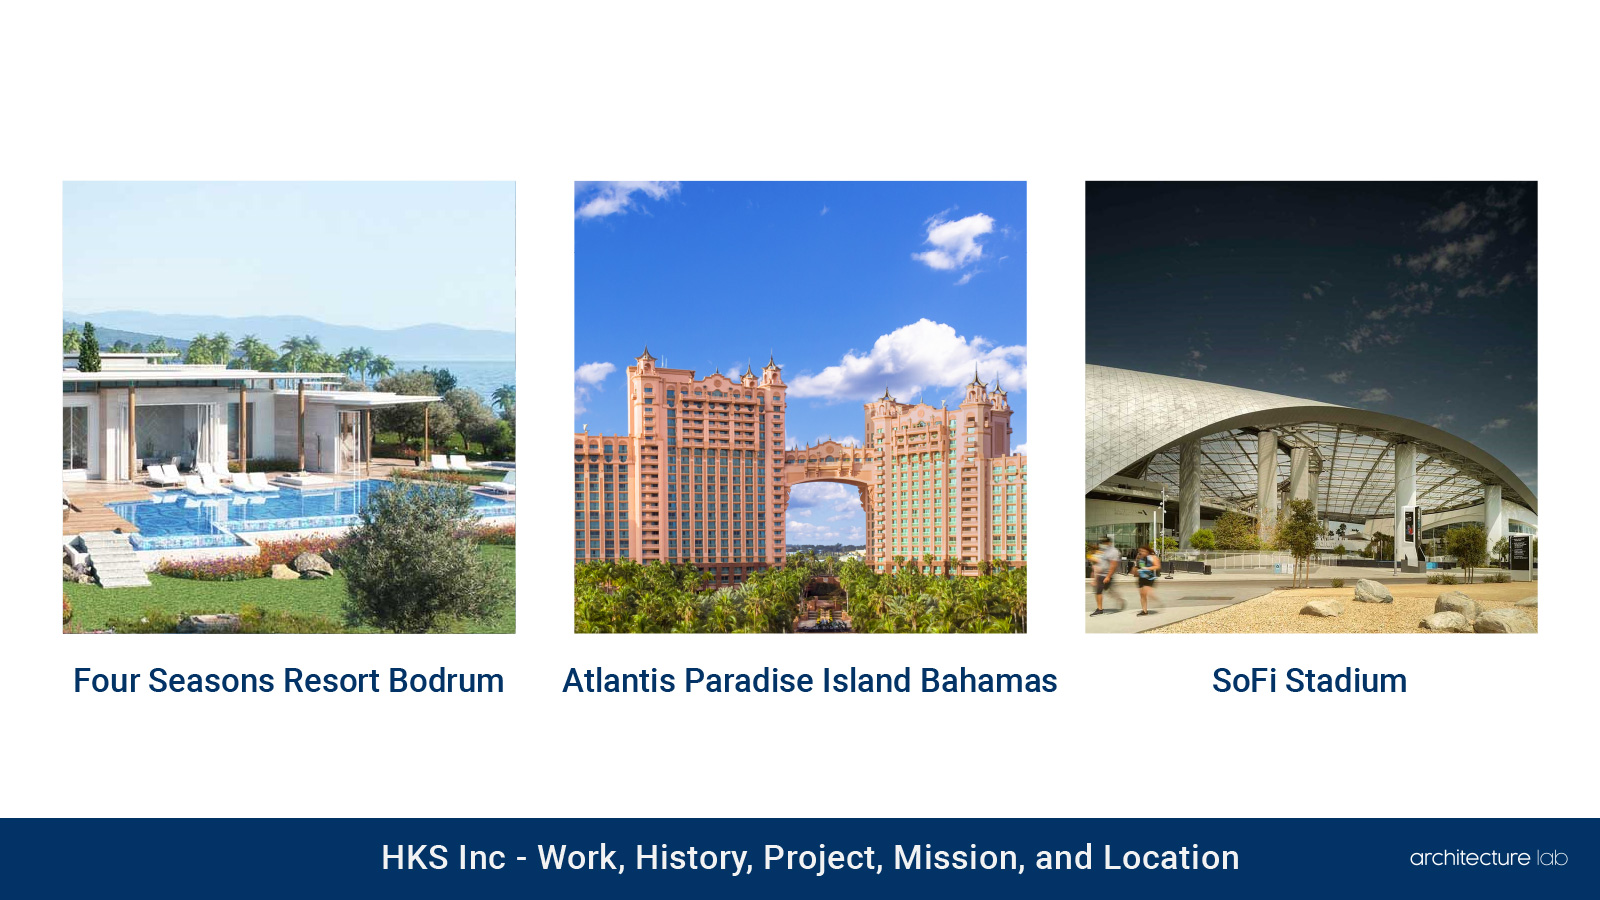 Hks inc. : work, history, project, mission and location